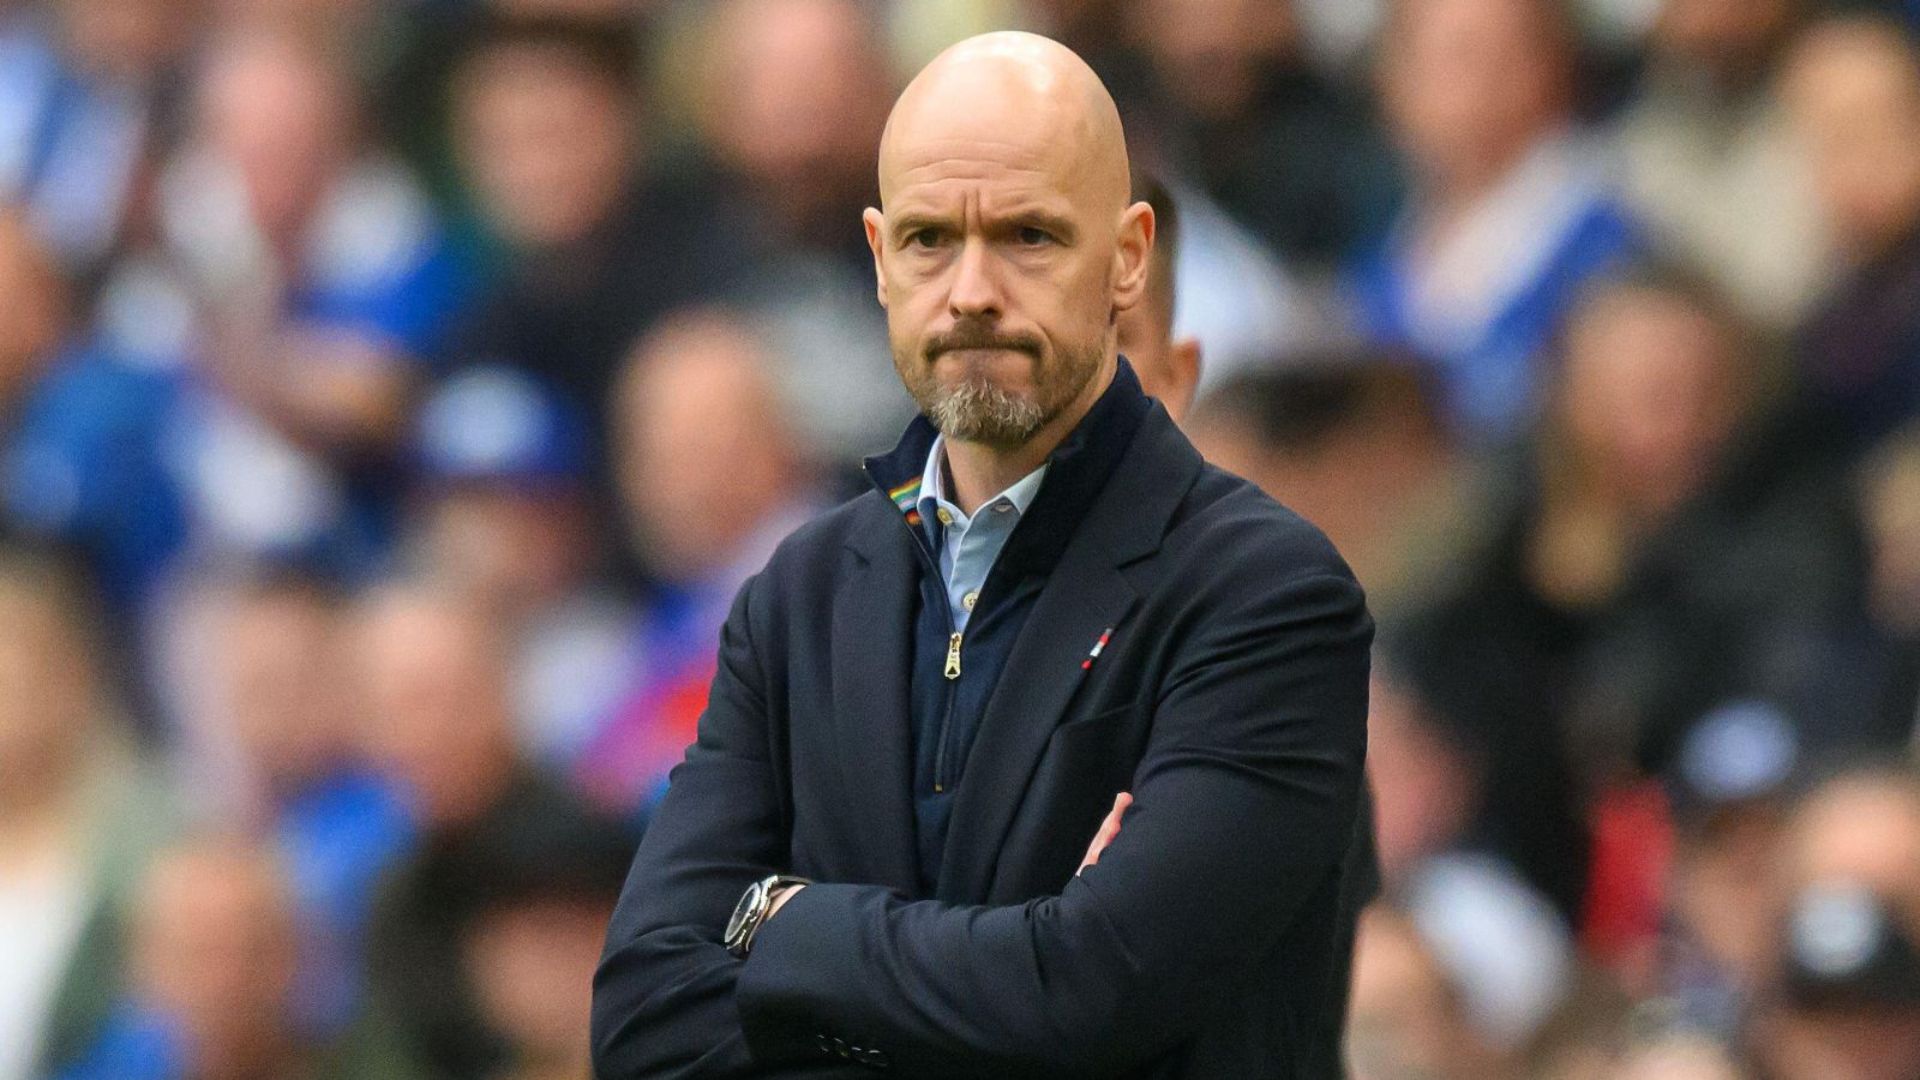 Ten Hag to discharge 13 players this Summer for the club to move forward